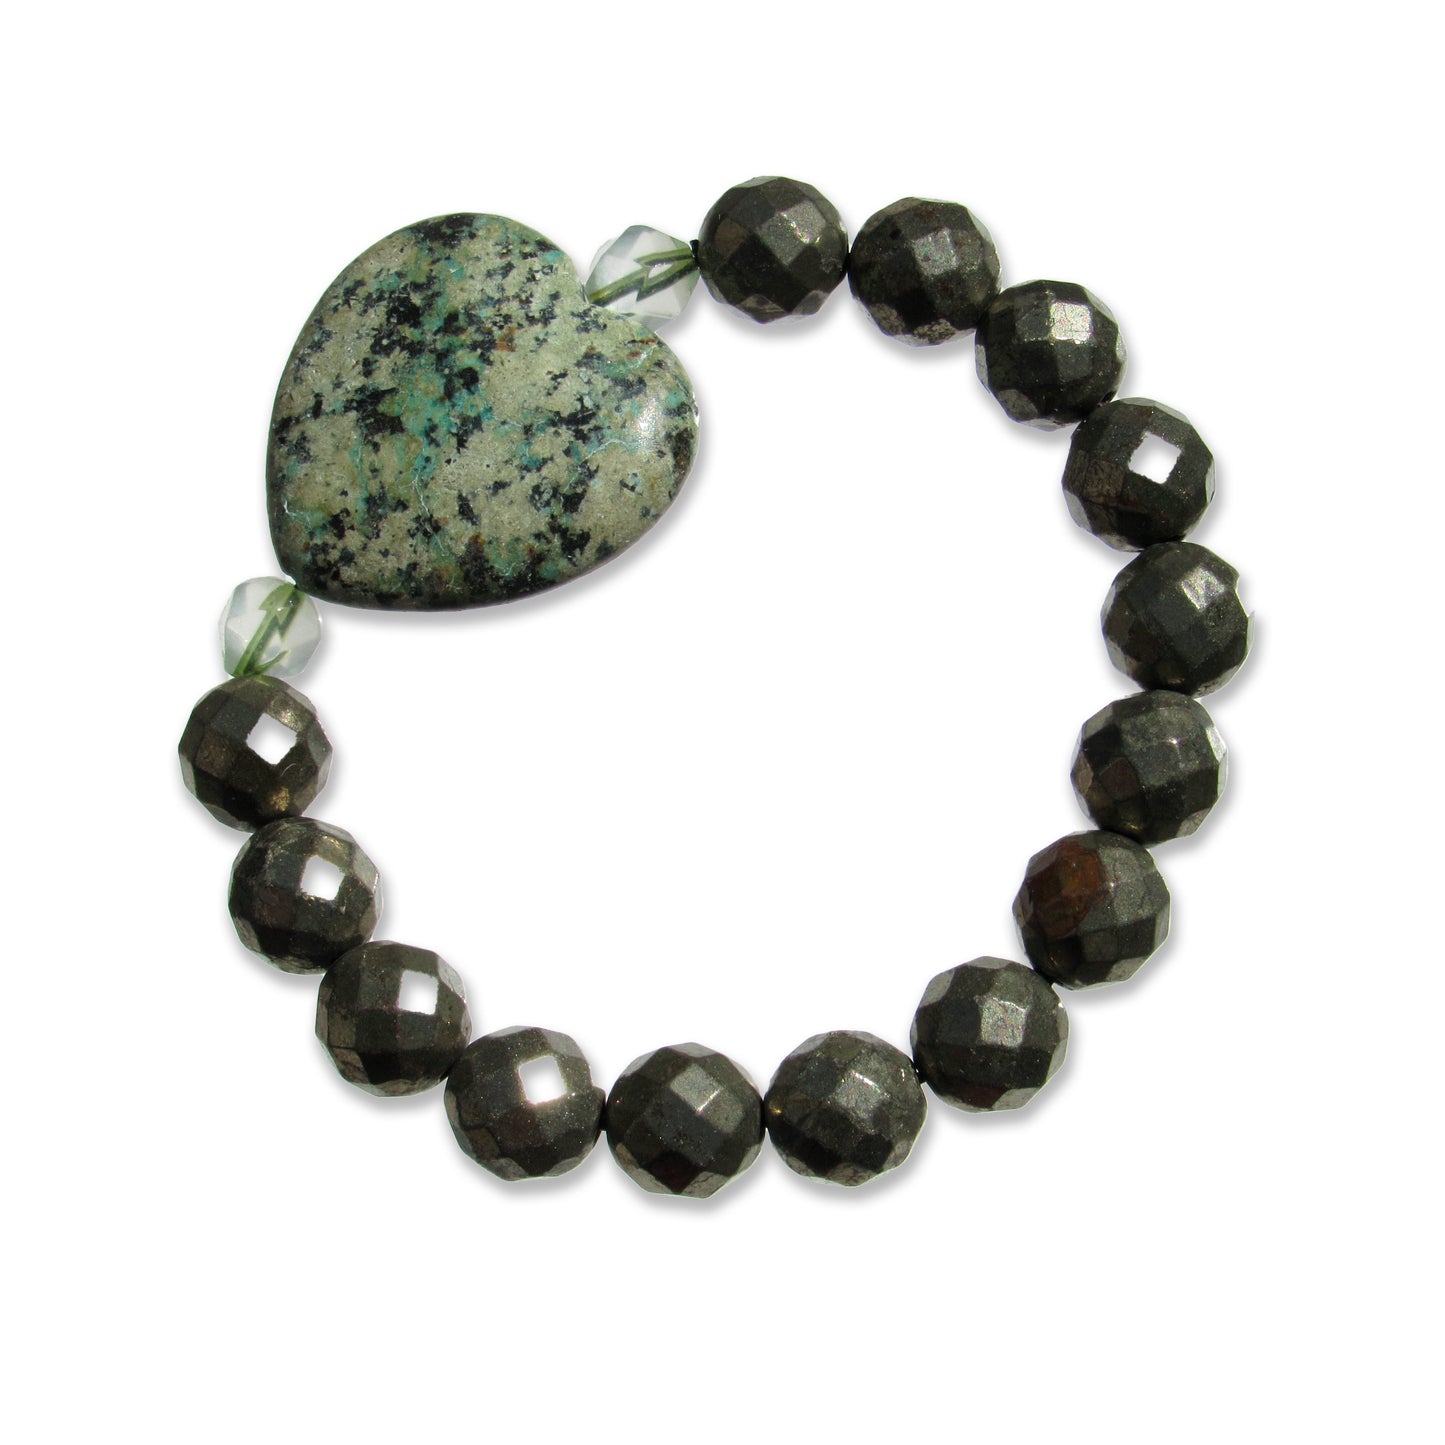 African Turquoise gemstone heart, Pyrite, and Green Topaz beaded bracelet